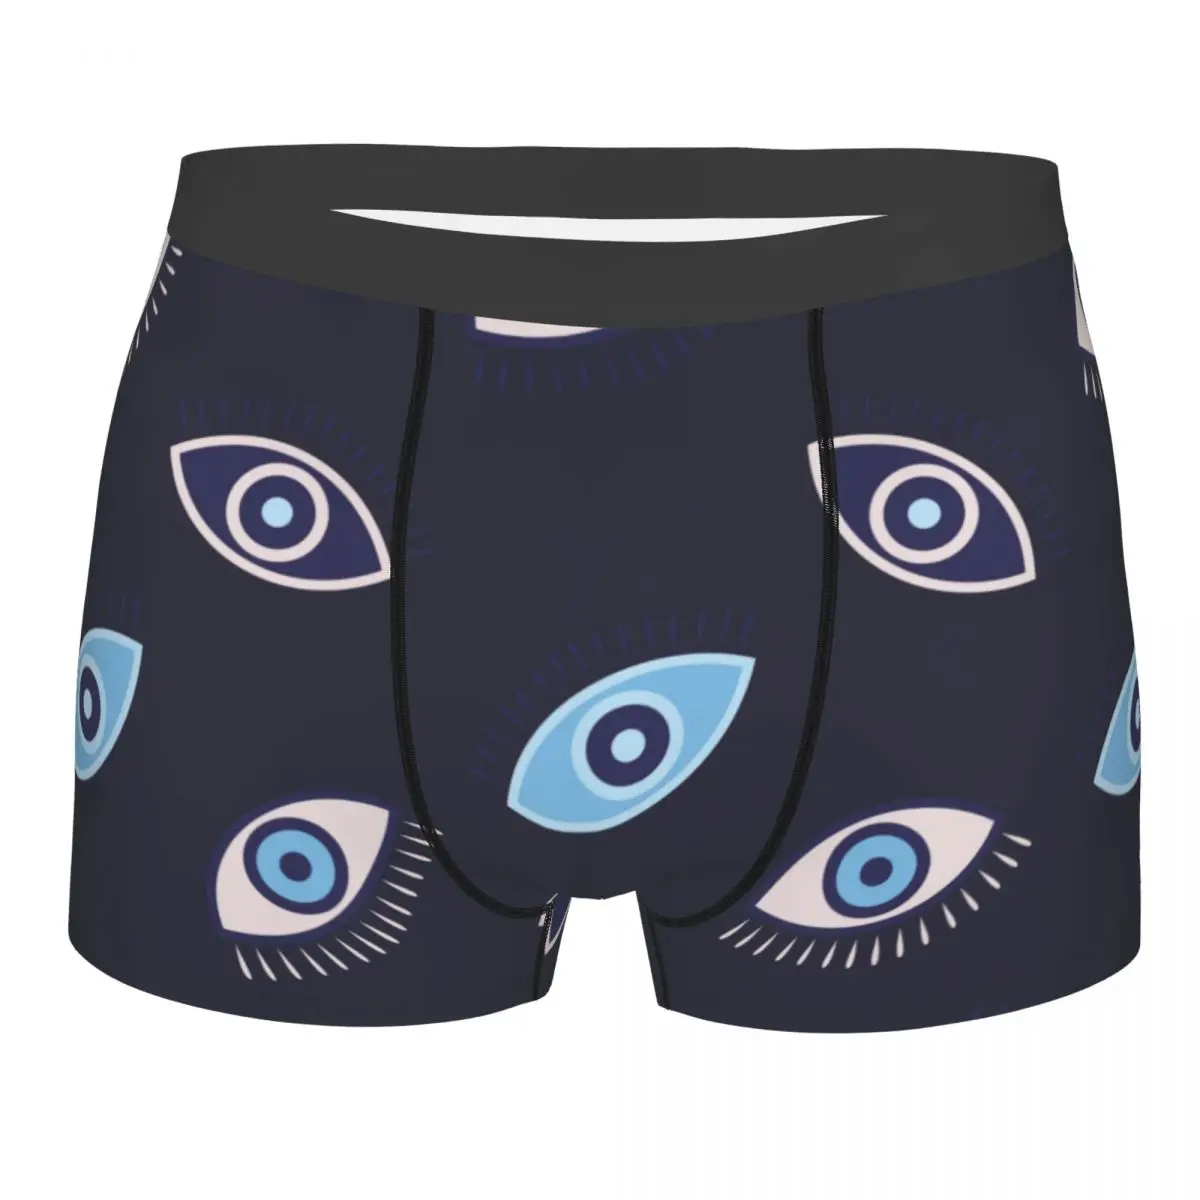 

Eyes Fantasy Men Boxer Briefs Underpants Pattern Texture Painting Highly Breathable High Quality Sexy Shorts Gift Idea